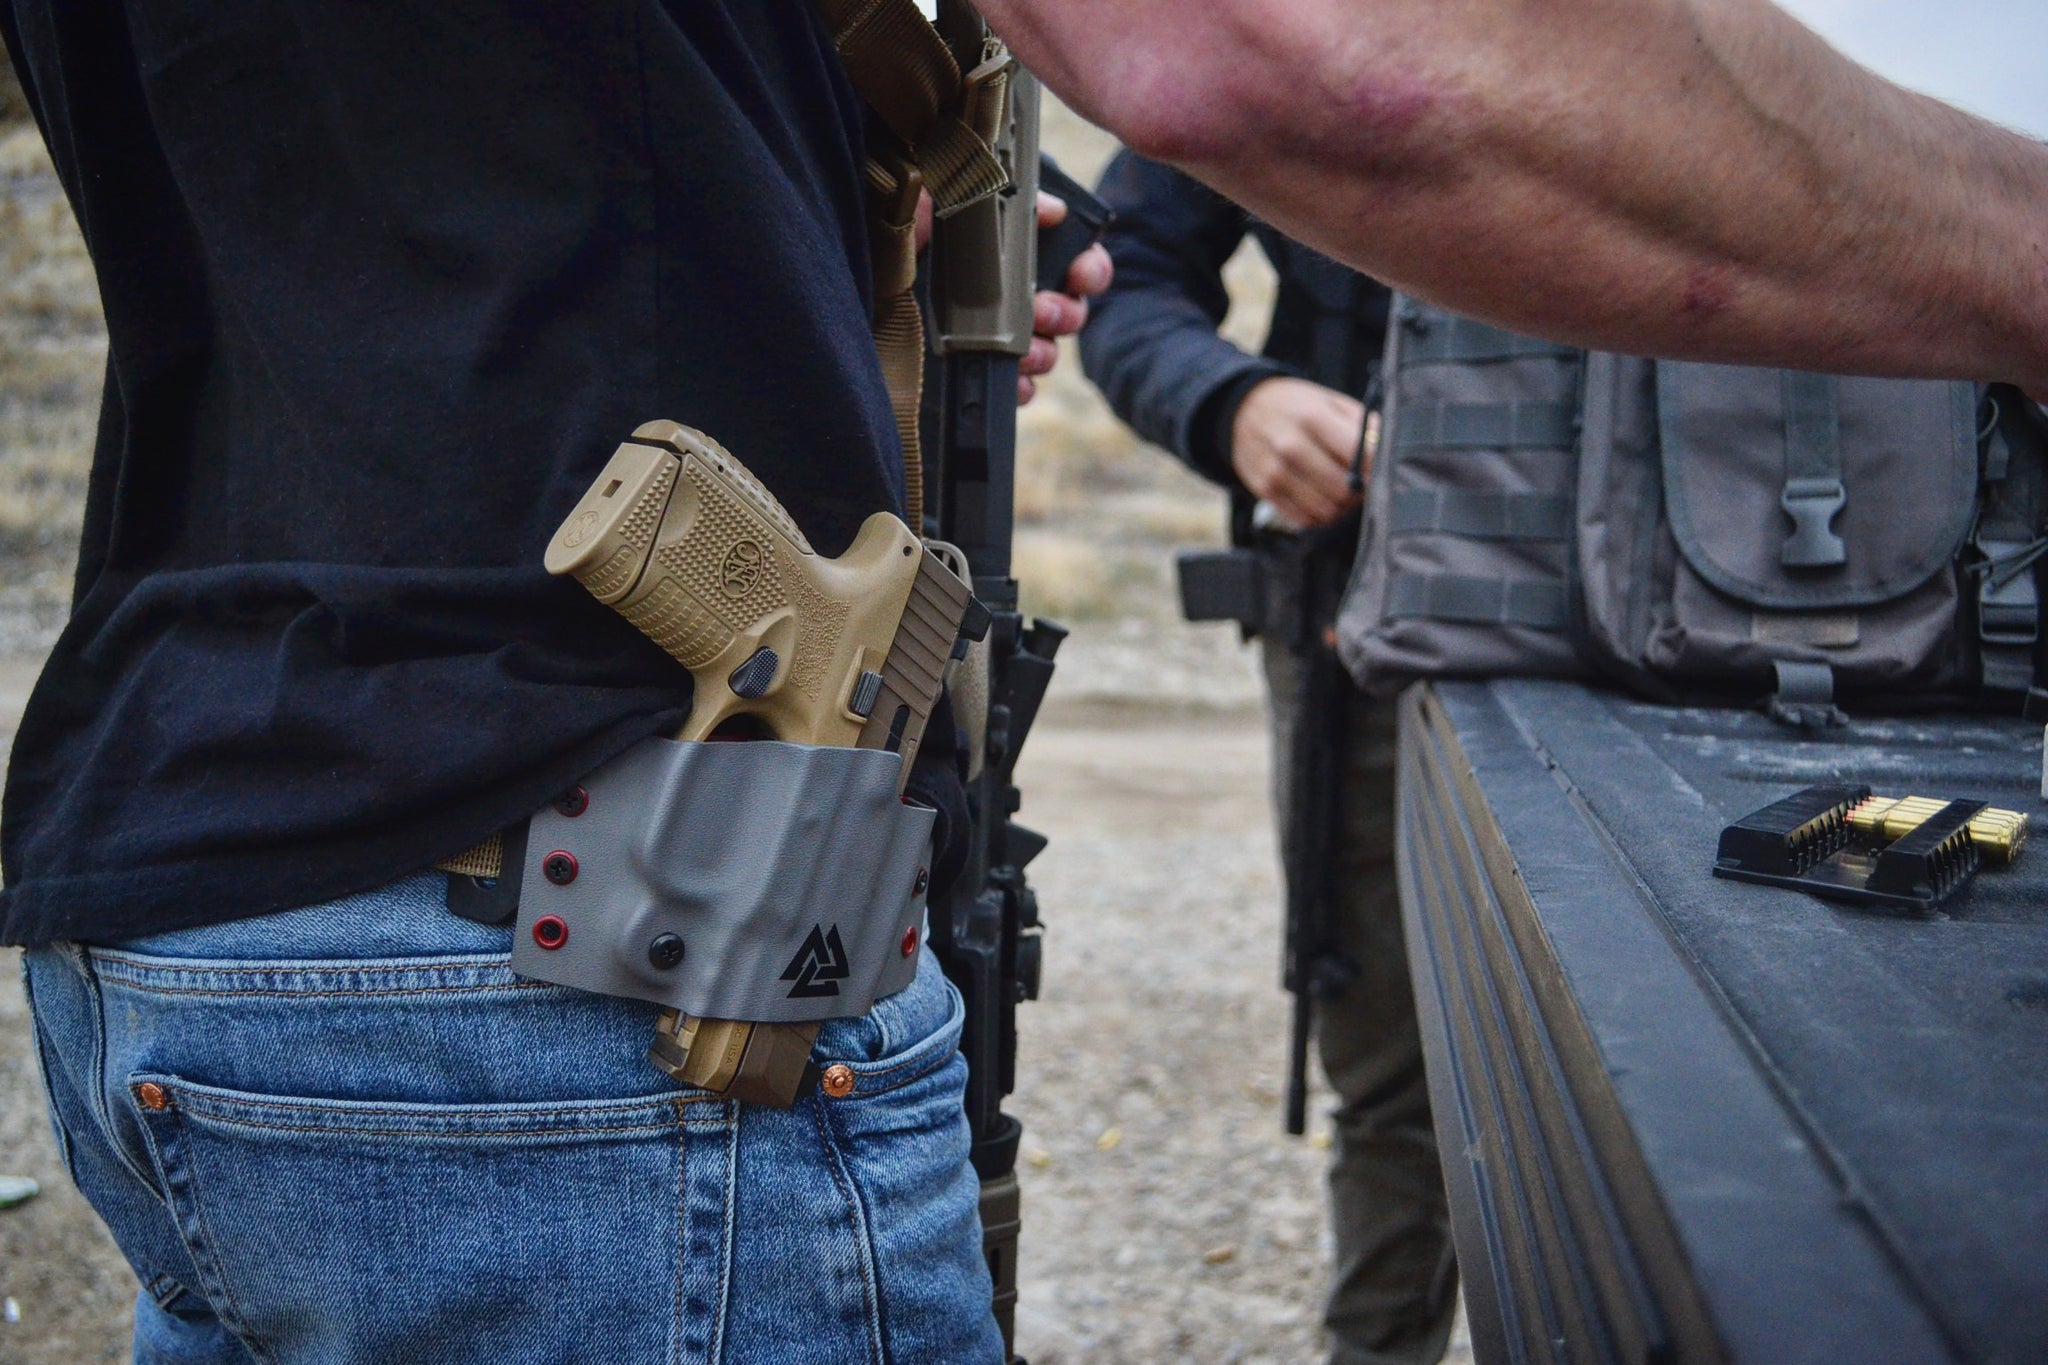 From an OG of OWB: Why I Still Carry Outside the Waistband